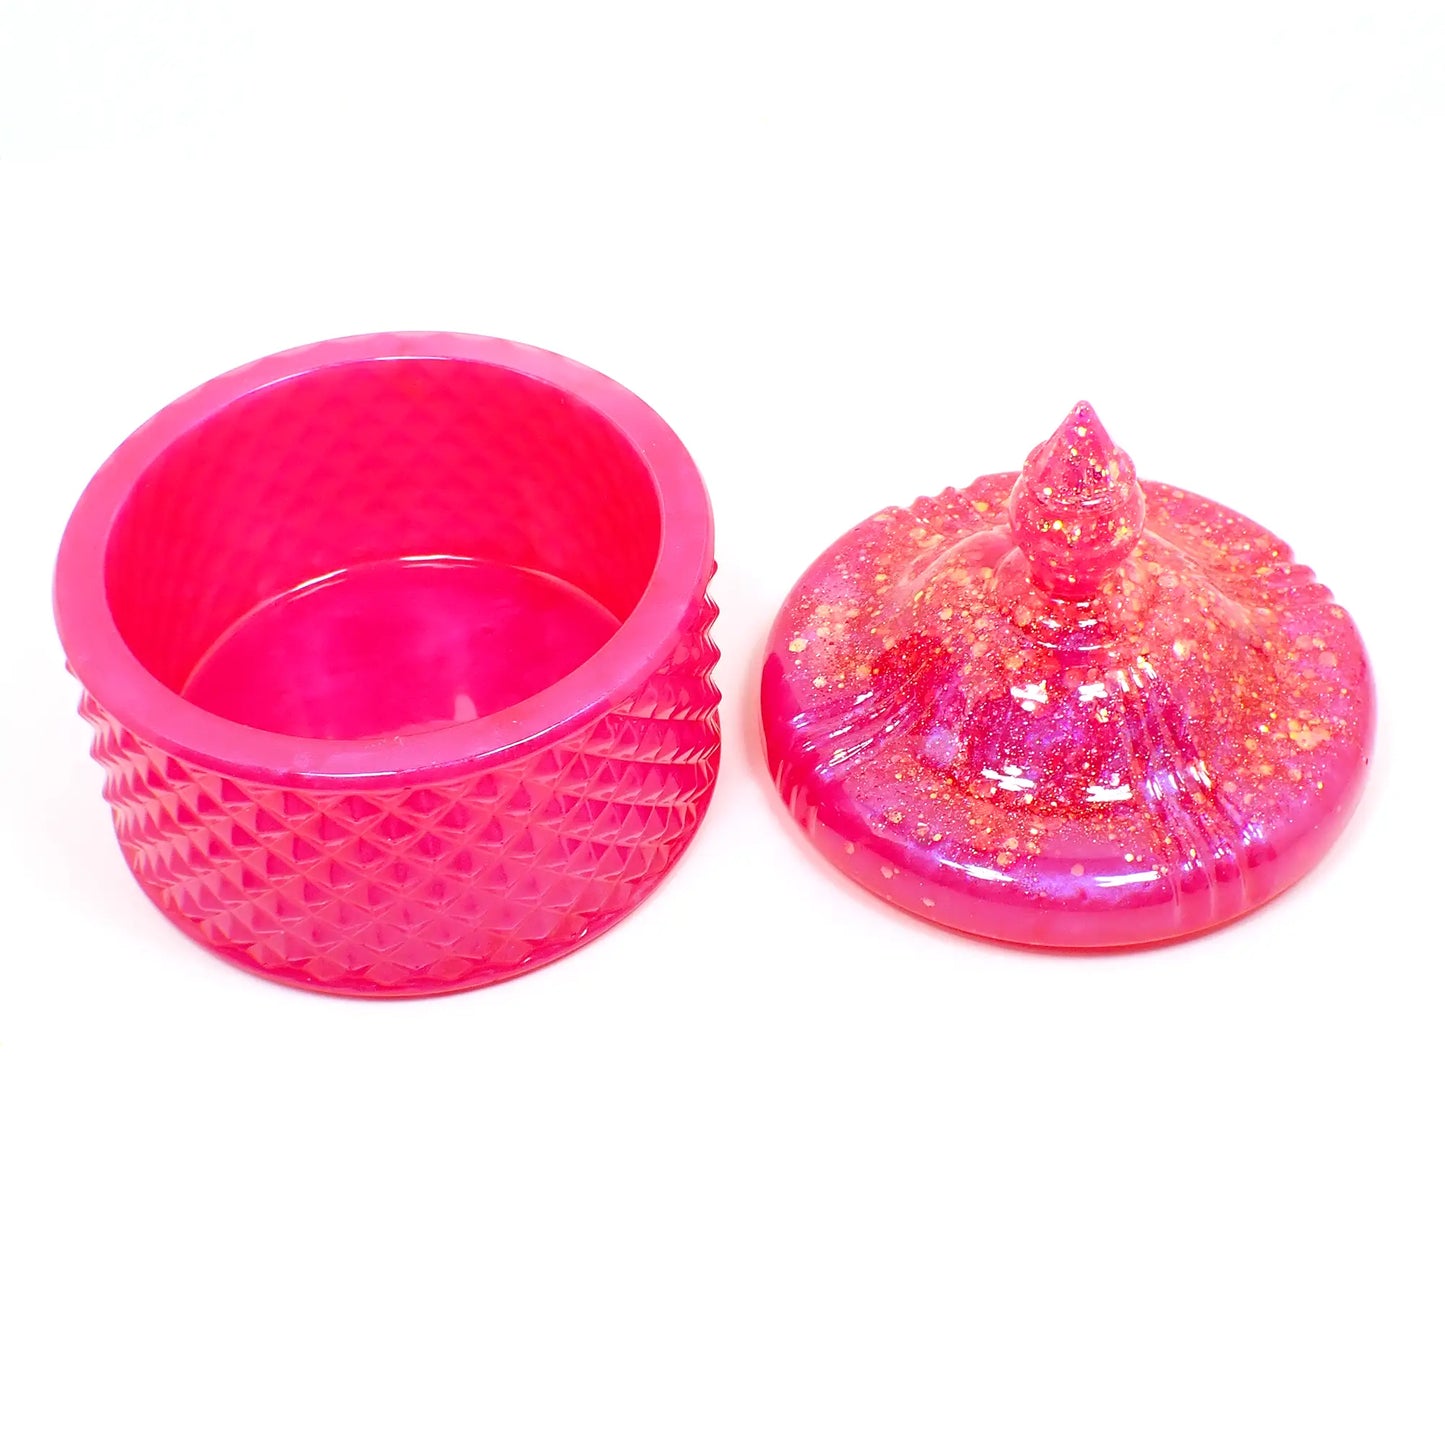 Handmade Pearly Bright Pink Trinket Box Candy Dish with Iridescent Glitter